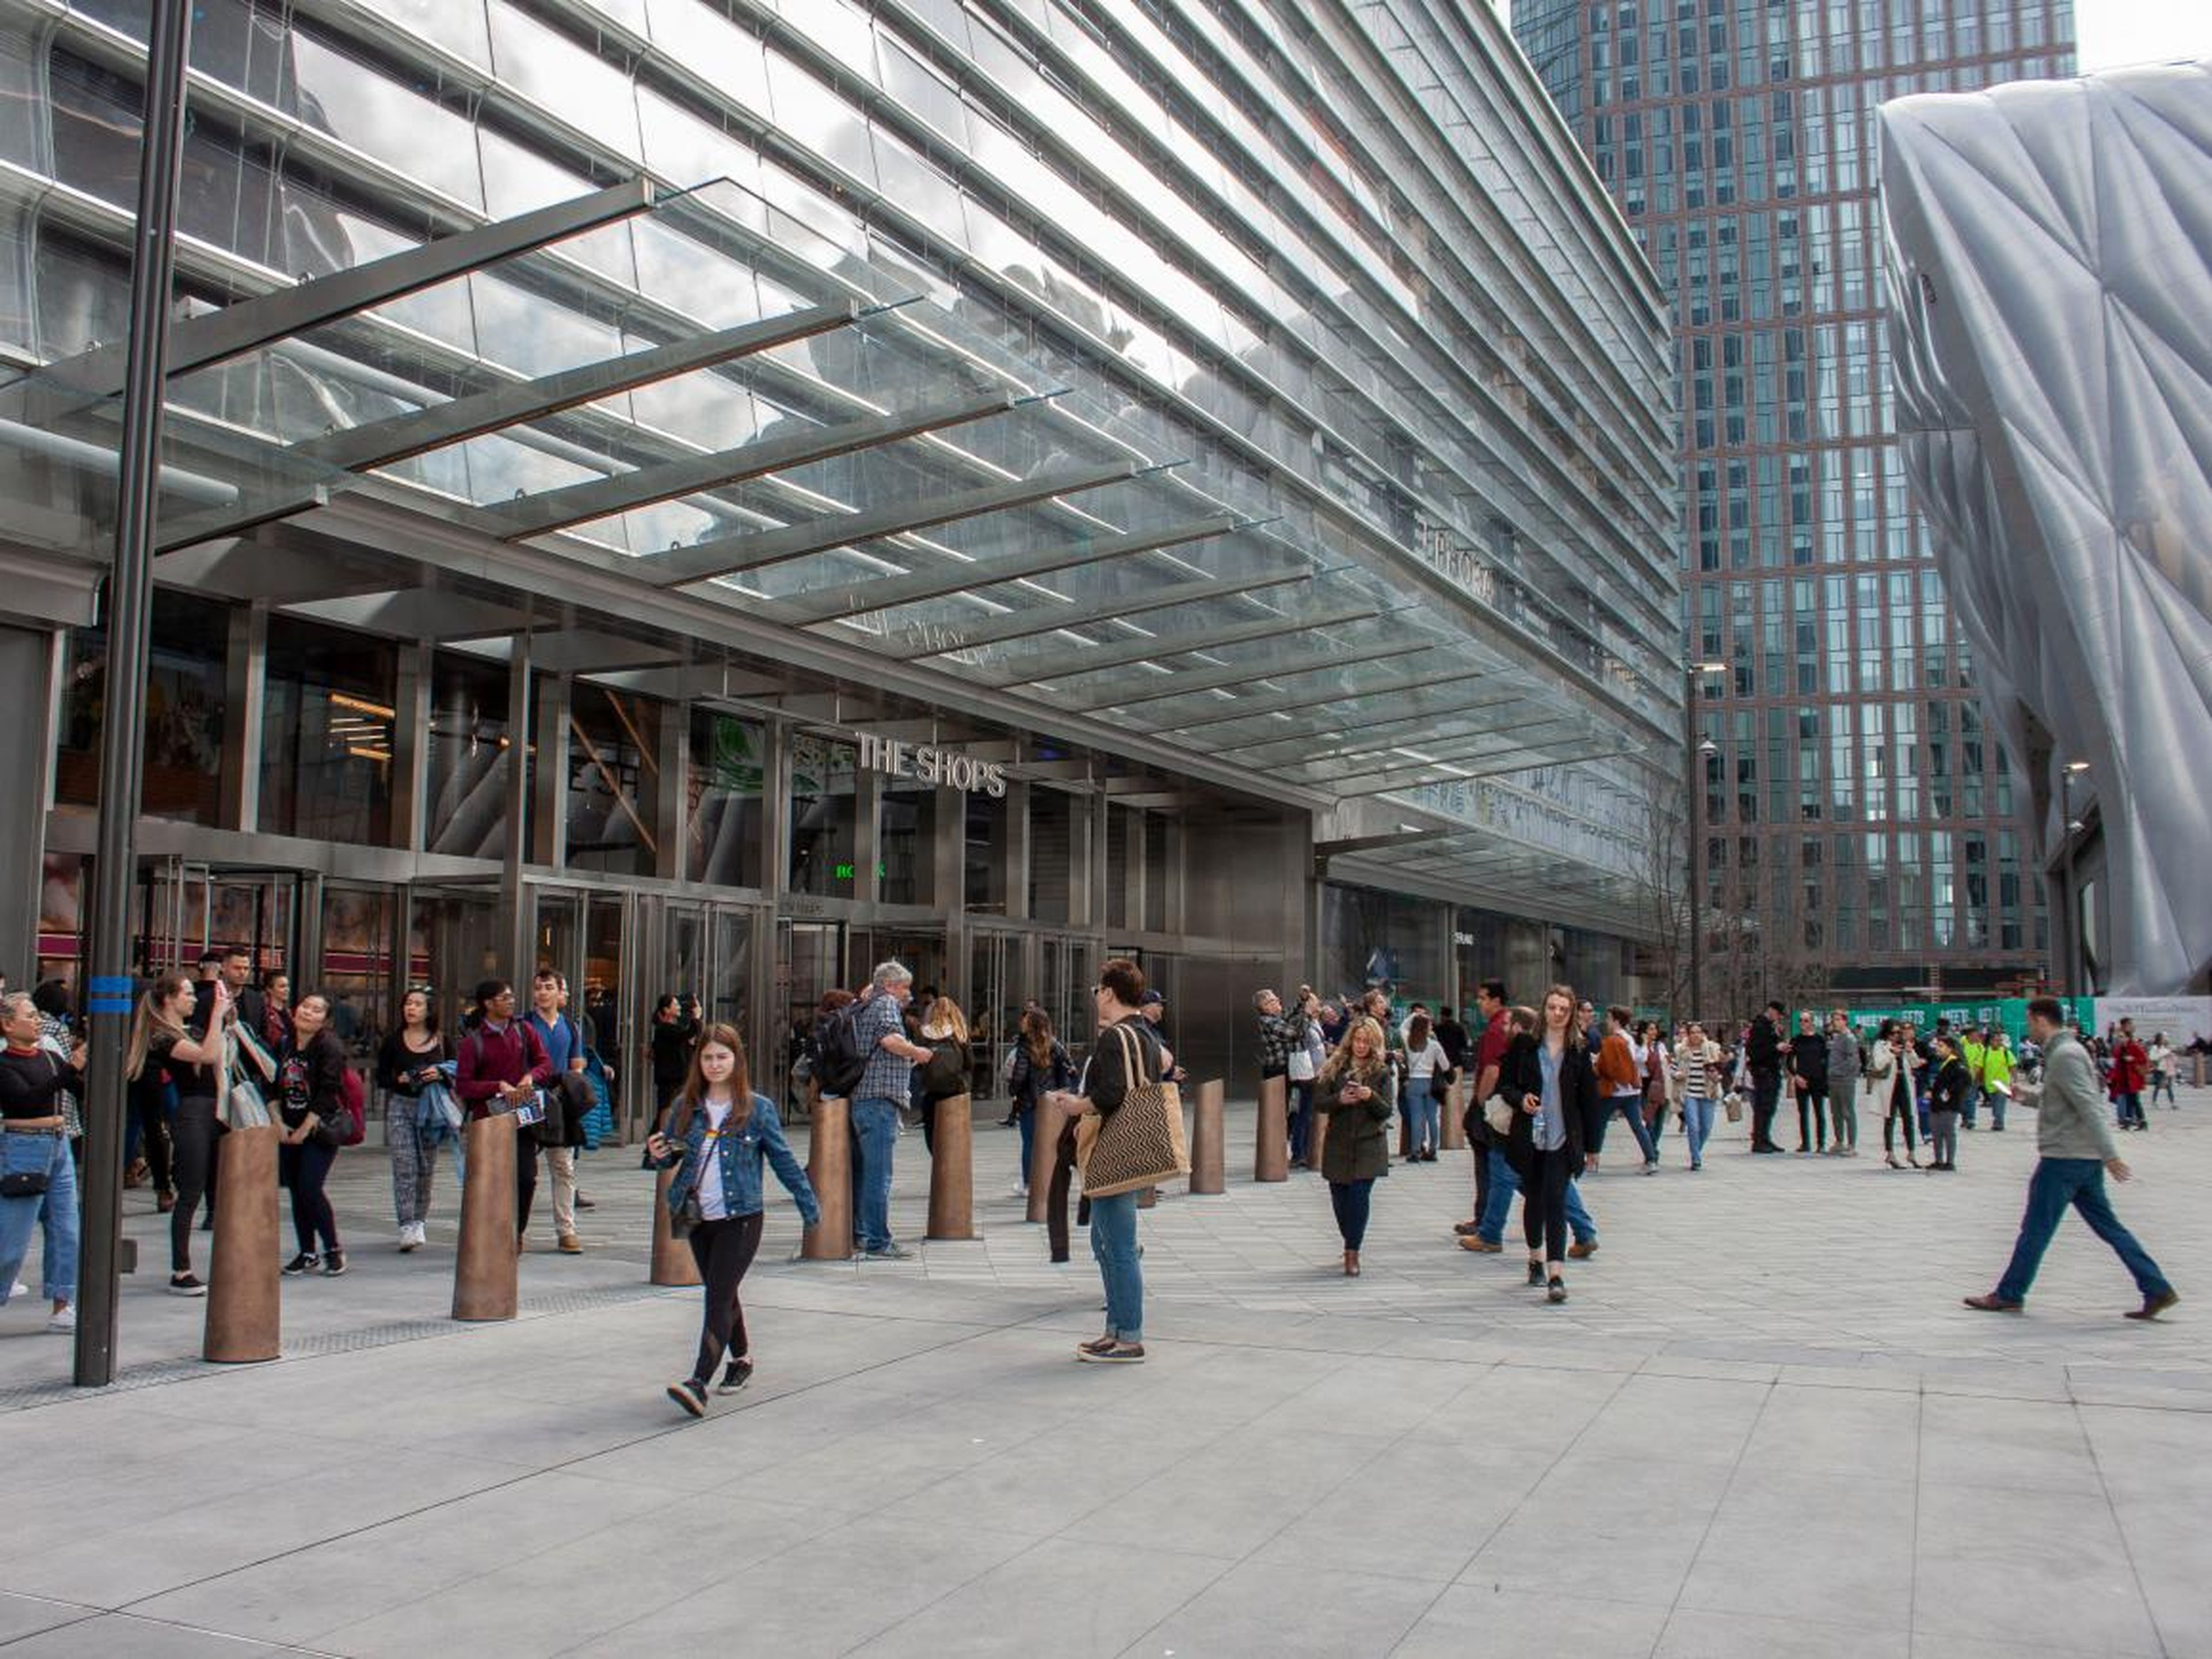 Hudson Yards was already bustling with people on its opening day.